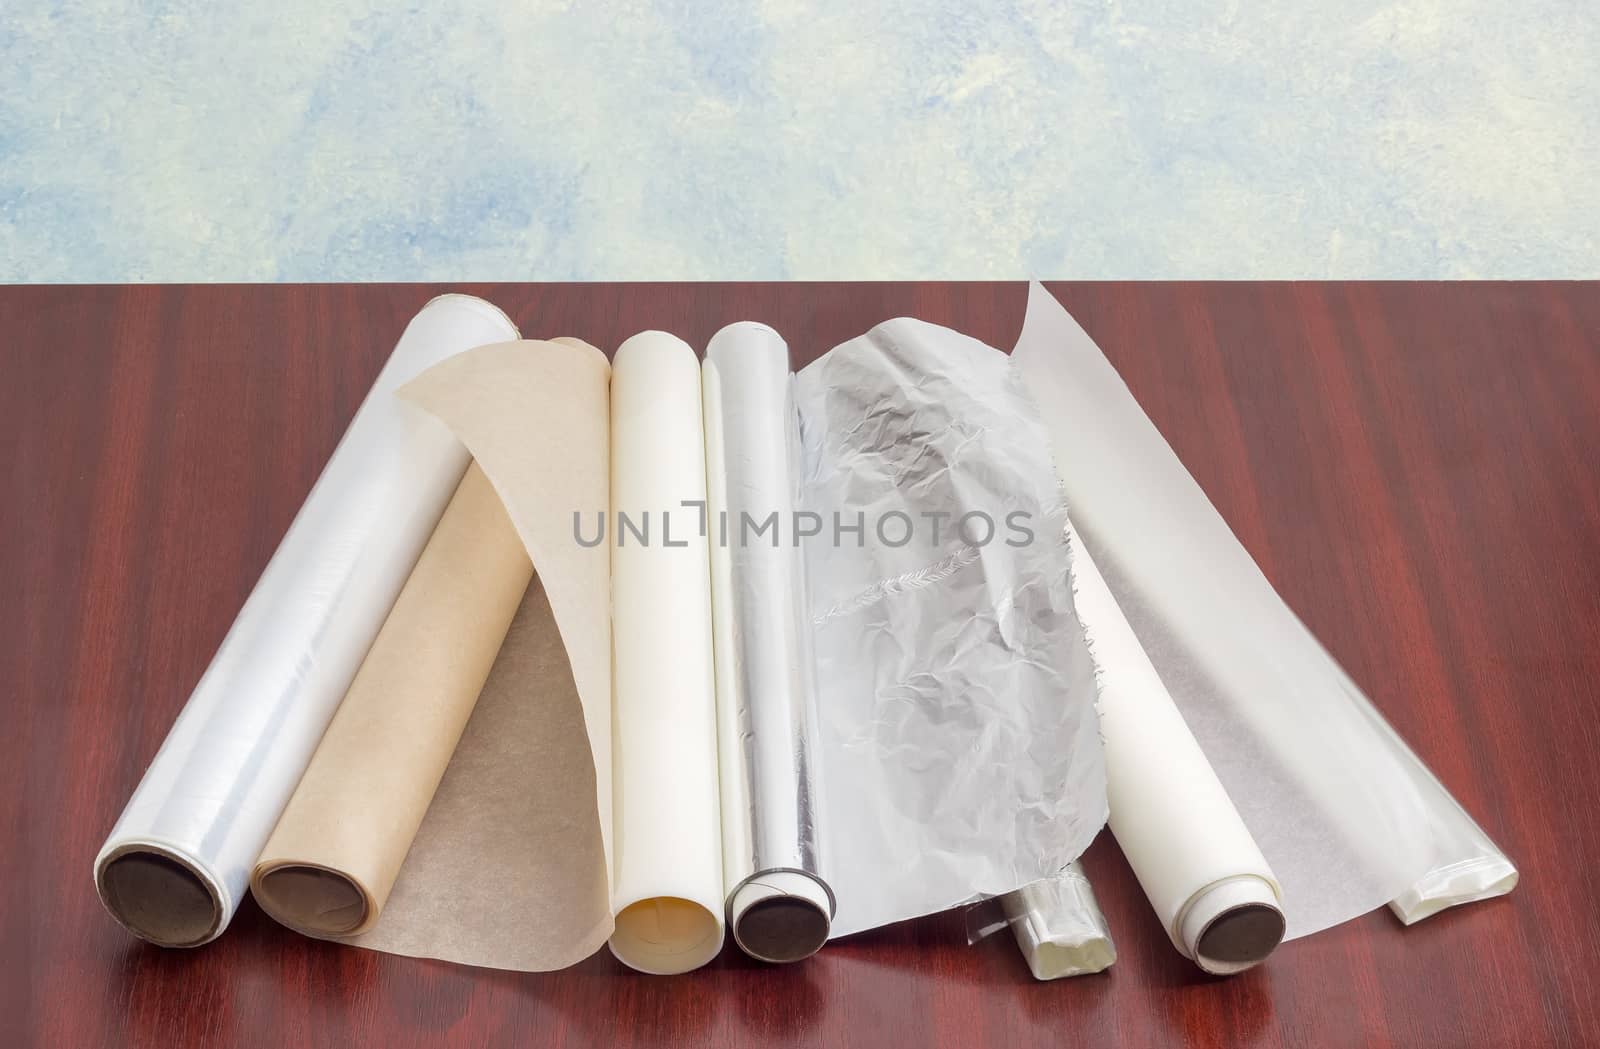 Several rolls of the plastic oven bags, plastic food wrap, aluminum foil and various parchment paper for household use on a dark red wooden surface
